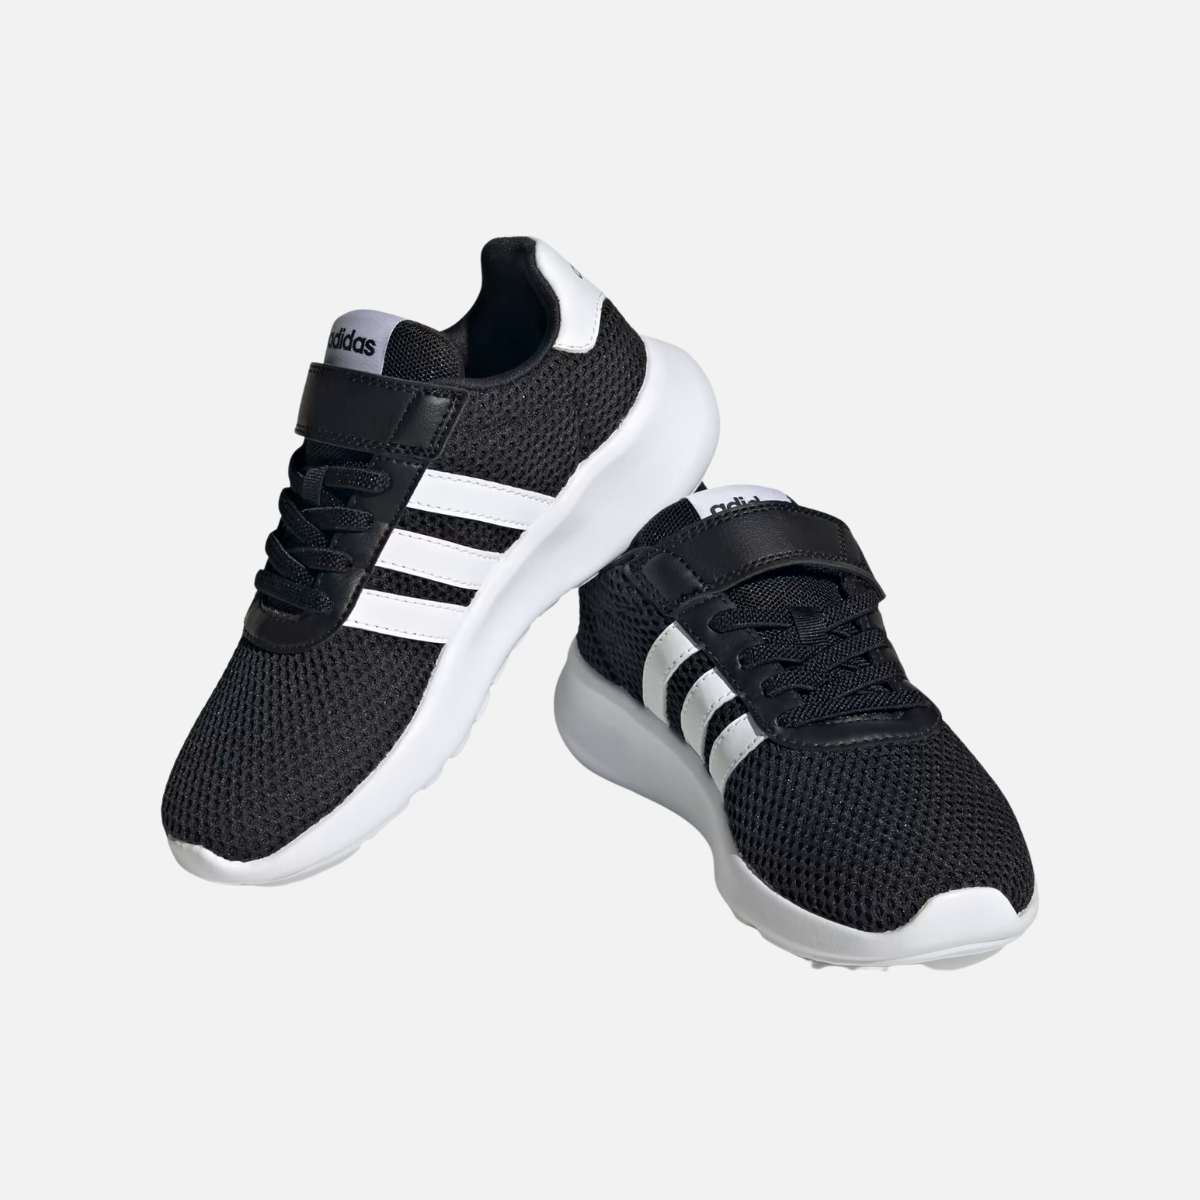 Adidas Lite Racer 3.0 Lifestyle Running Kids Unisex Shoes BOY AND GIRL (4-7 YEAR) -Core Black/Cloud White/Cloud White